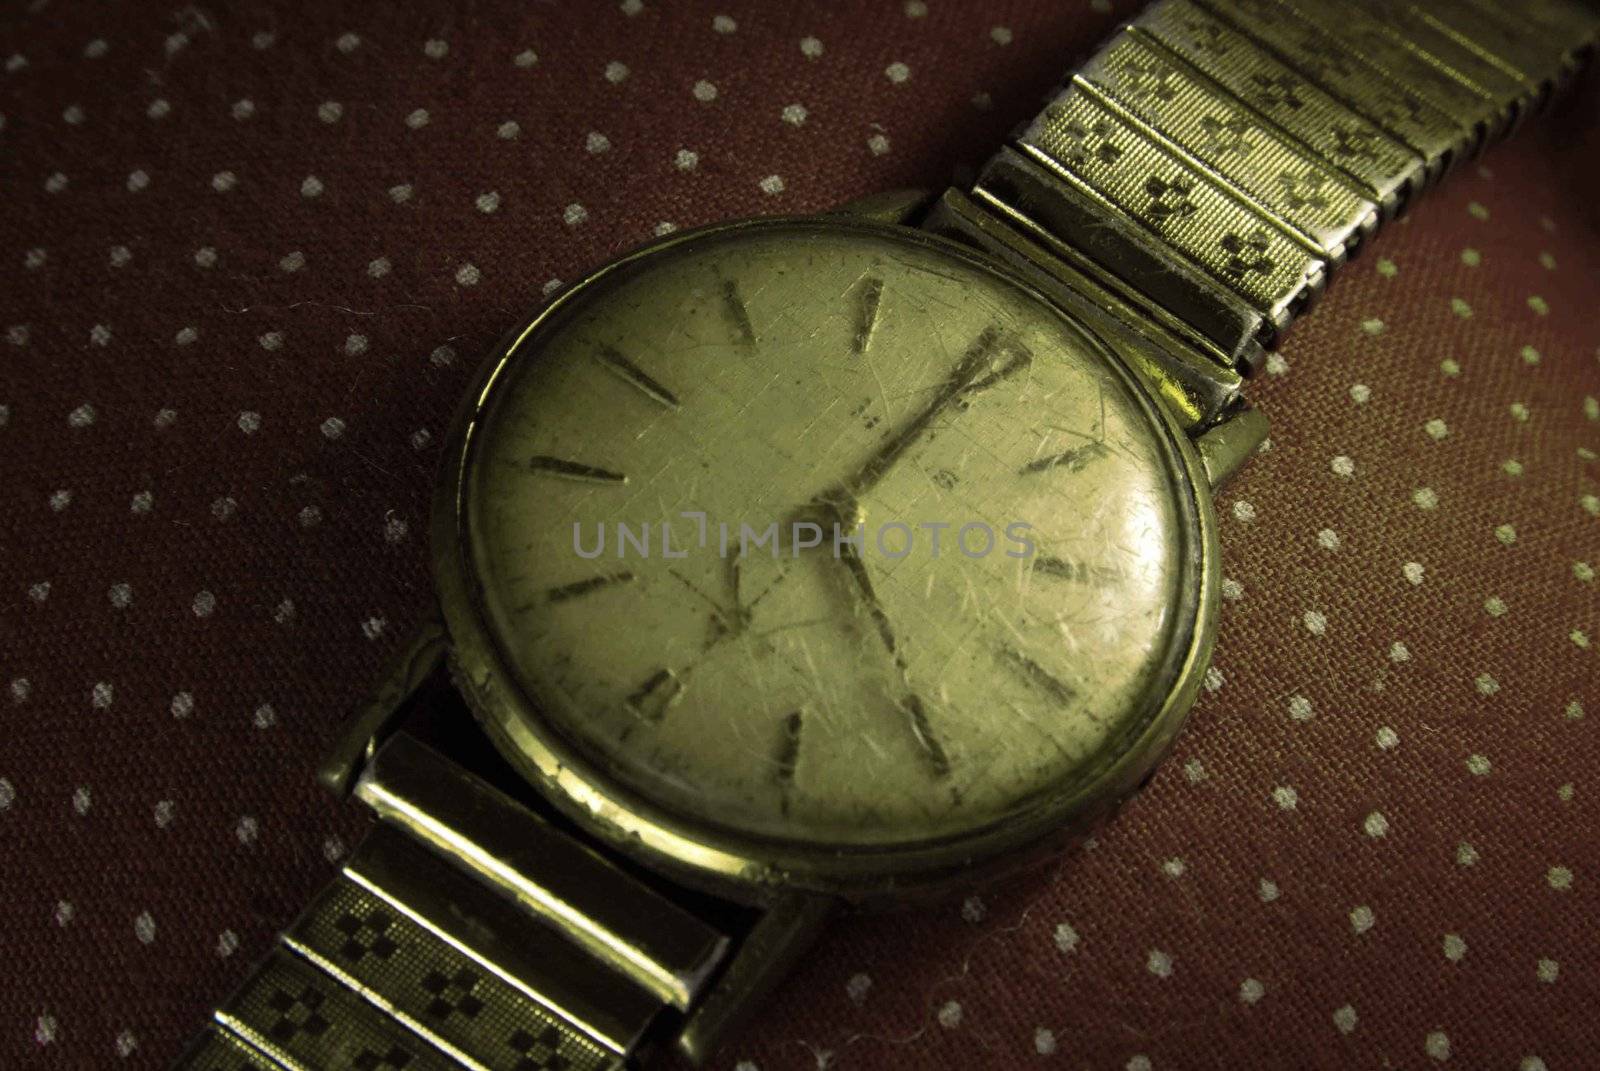 Retro golden wristwatch close up on old fashioned cloth background.